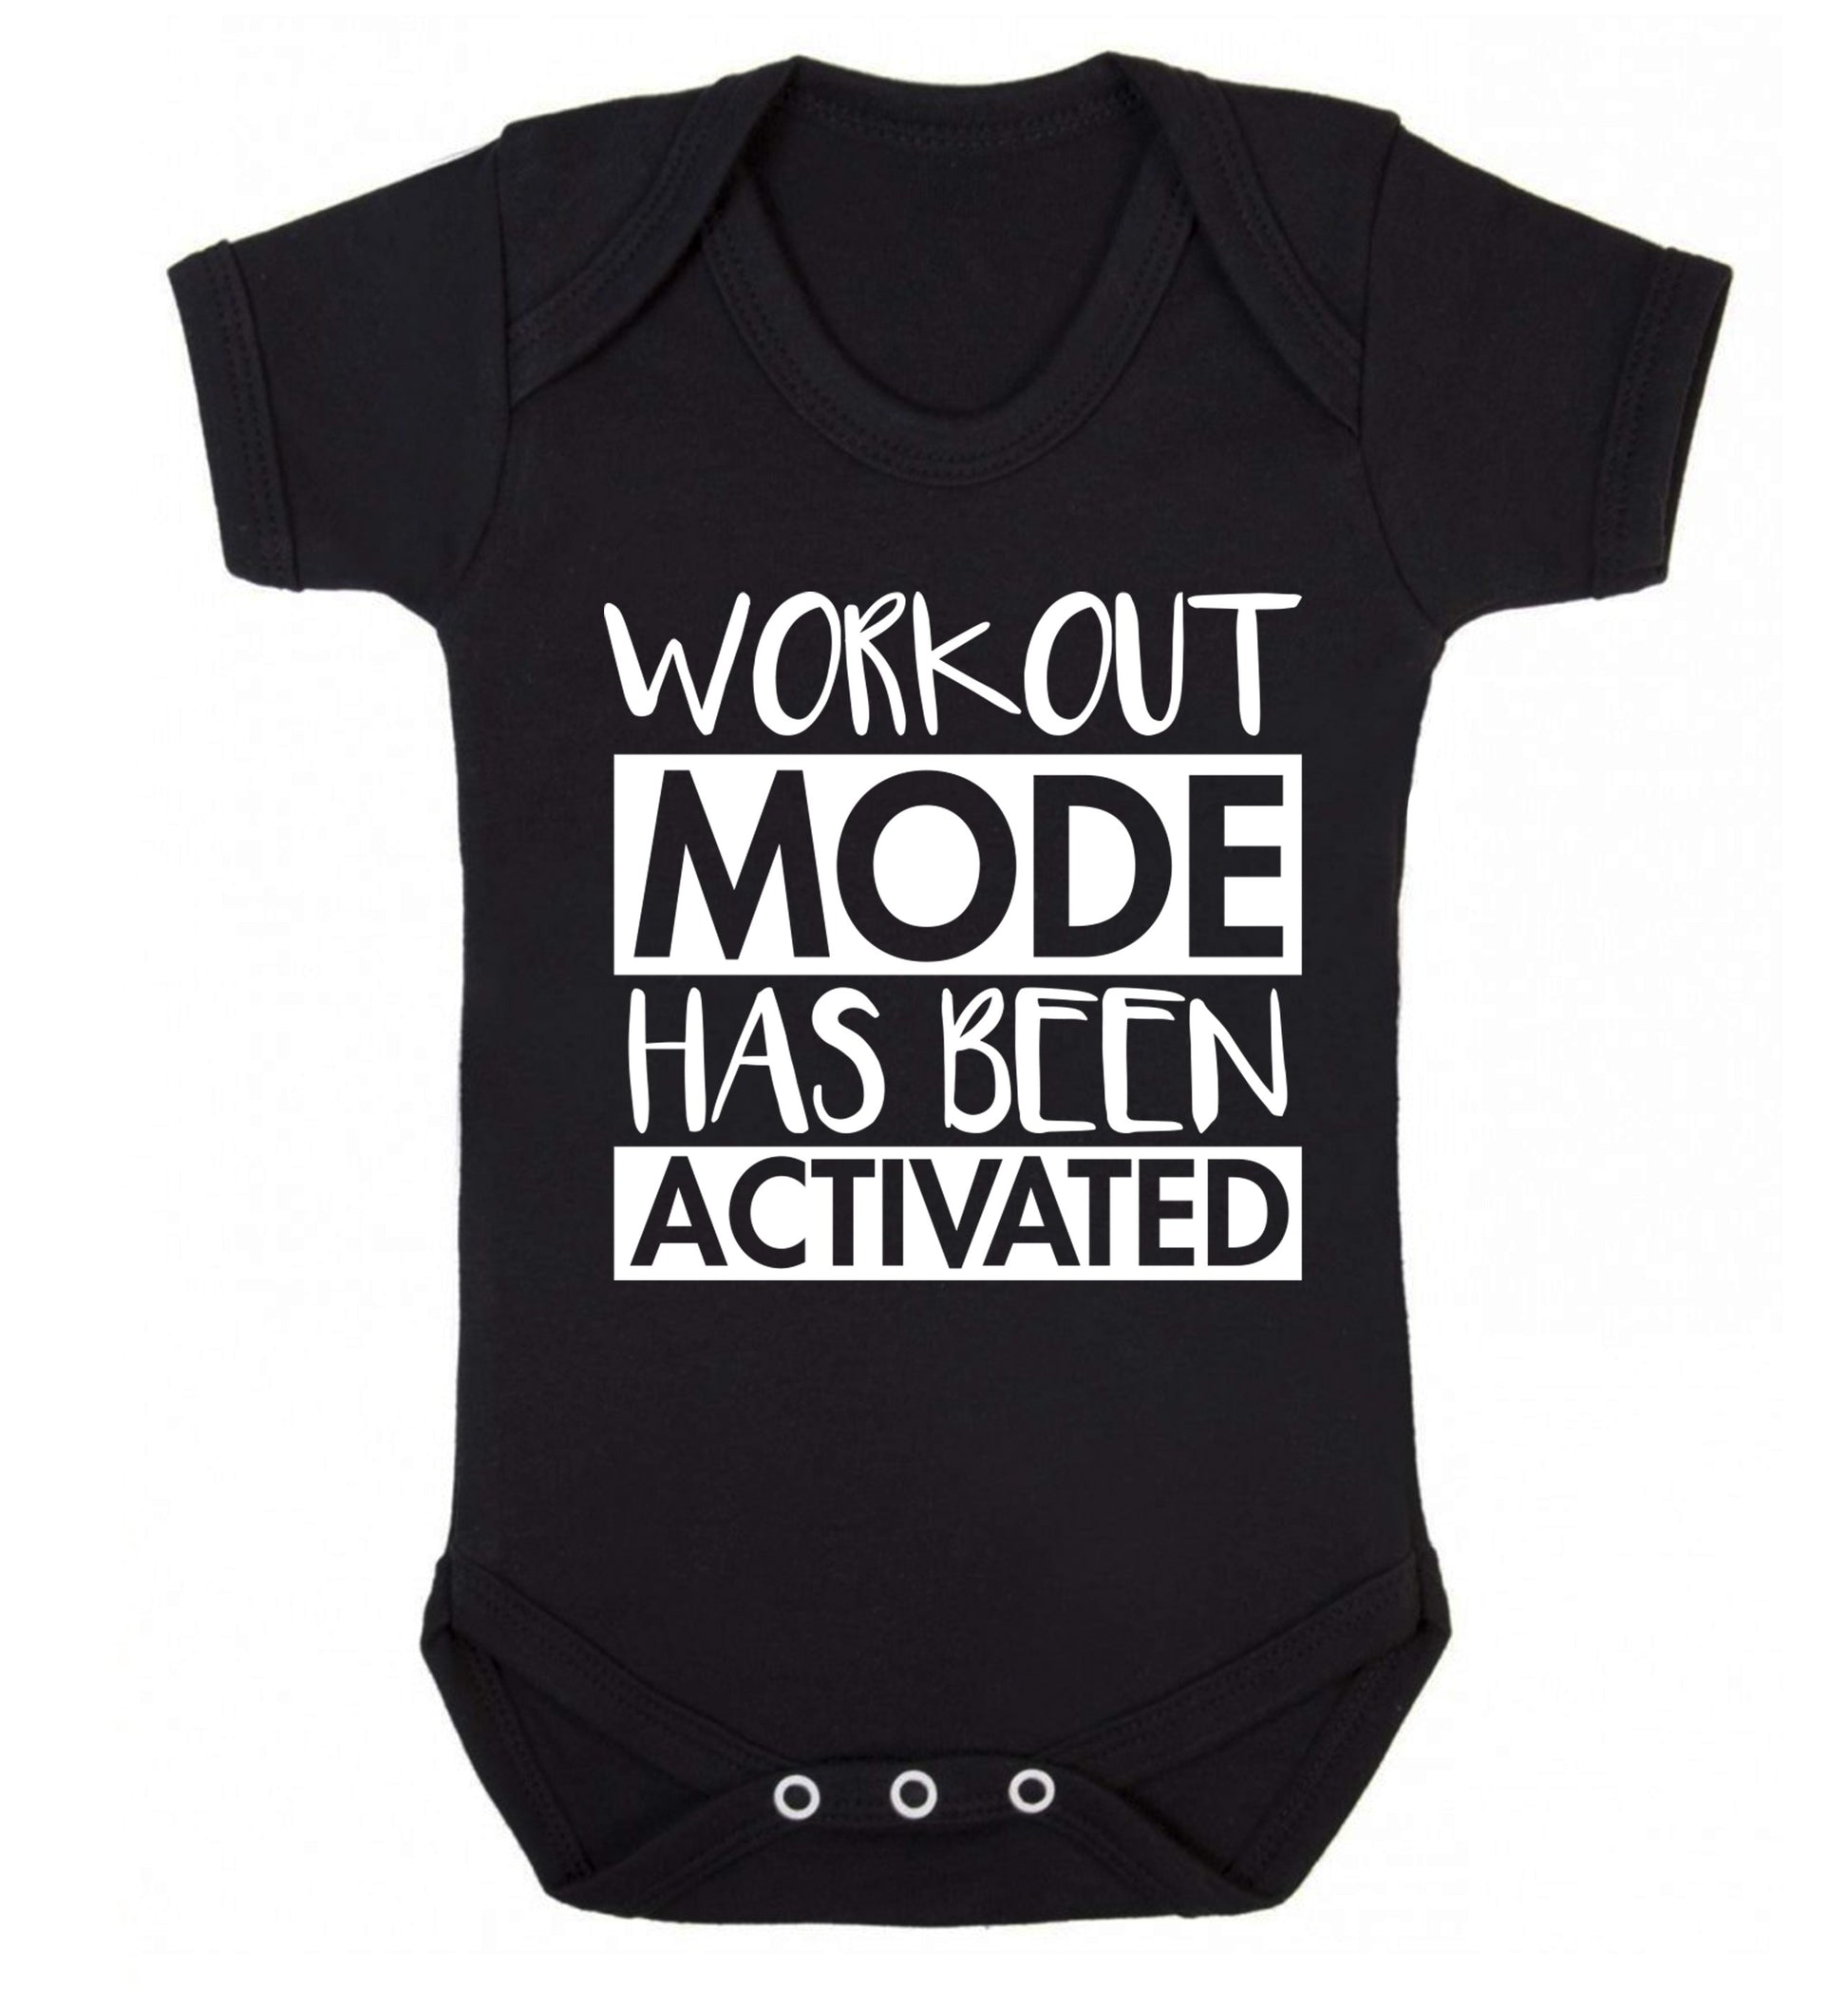 Workout mode has been activated Baby Vest black 18-24 months